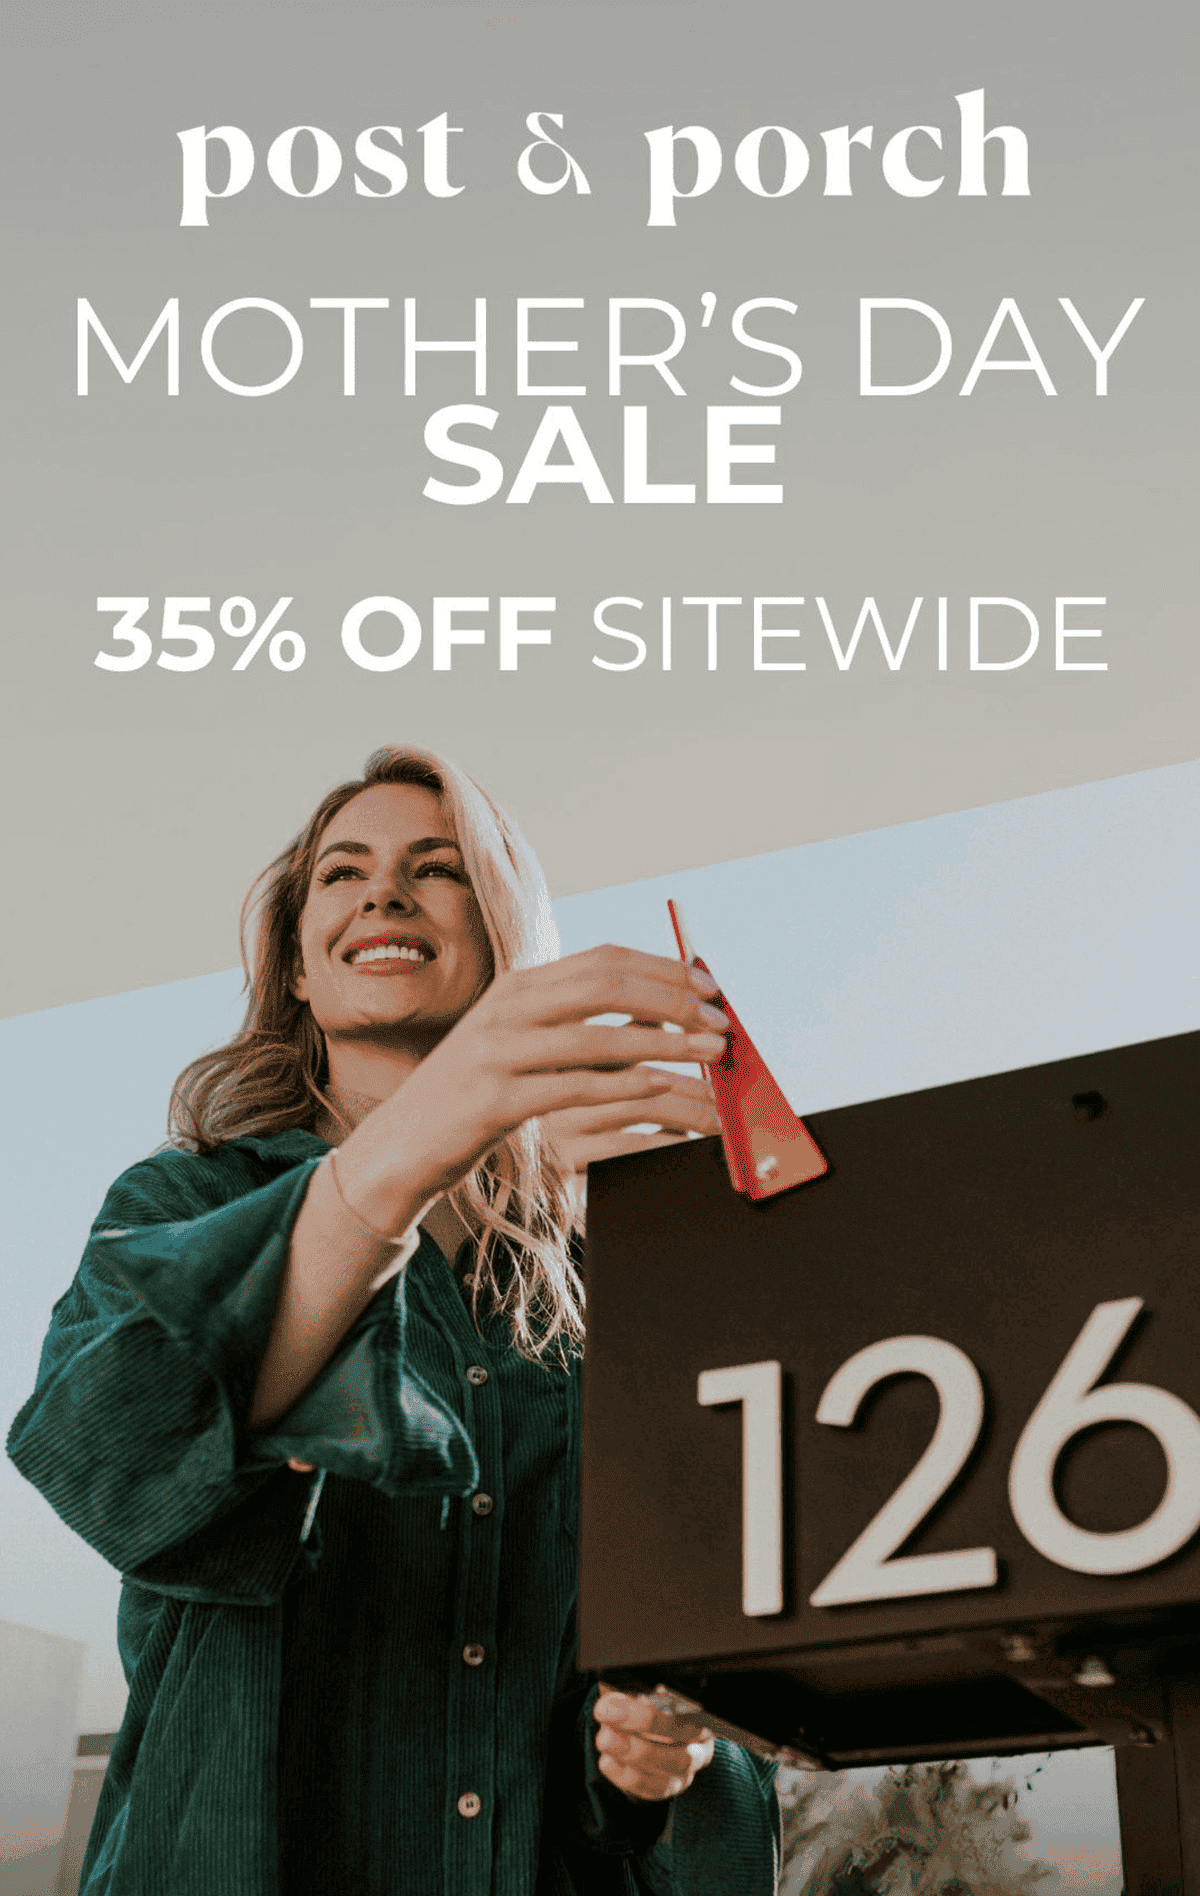 MOTHER’S DAY SALE